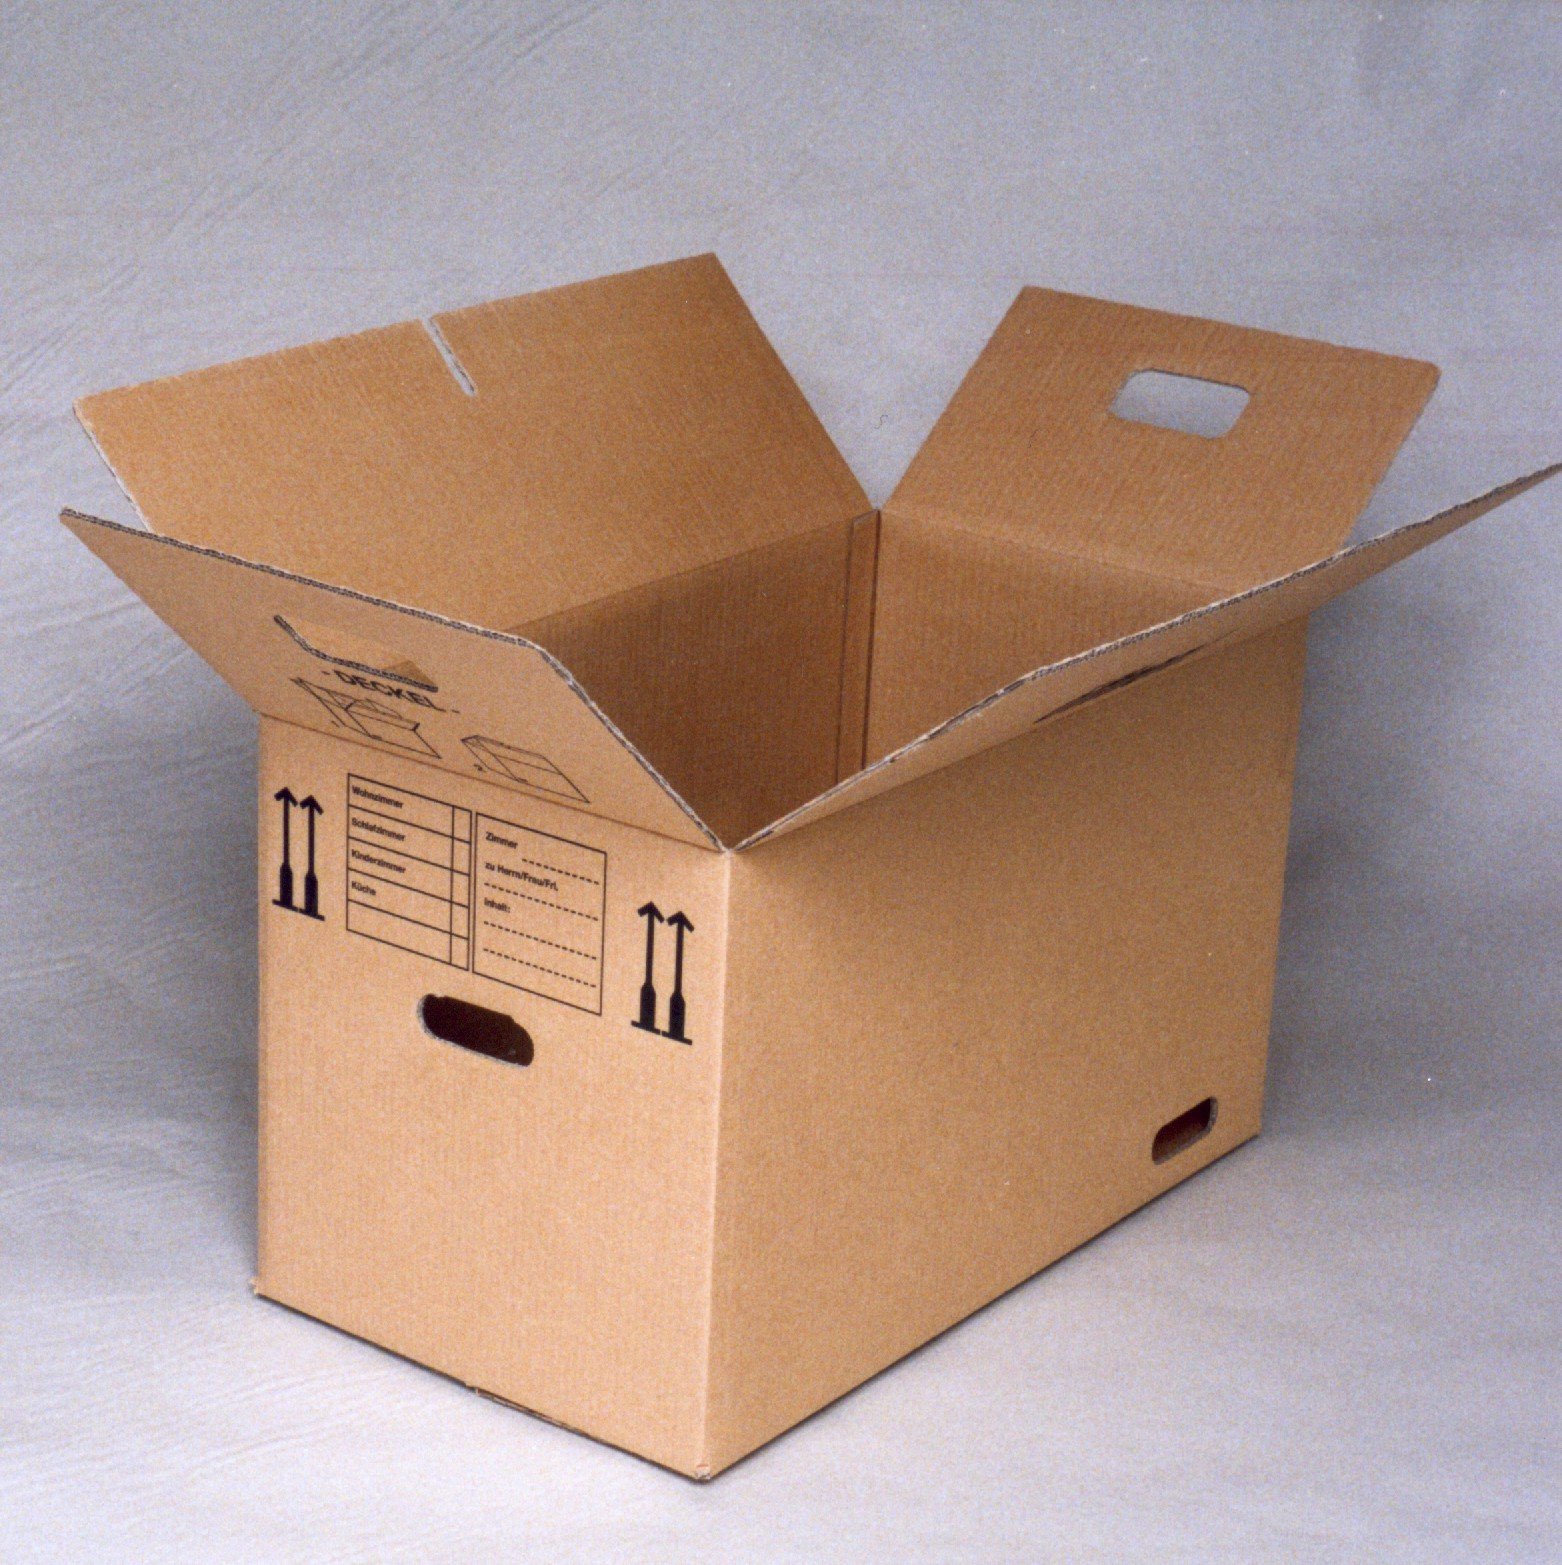 Cardboard Box - The Strong National Museum of Play